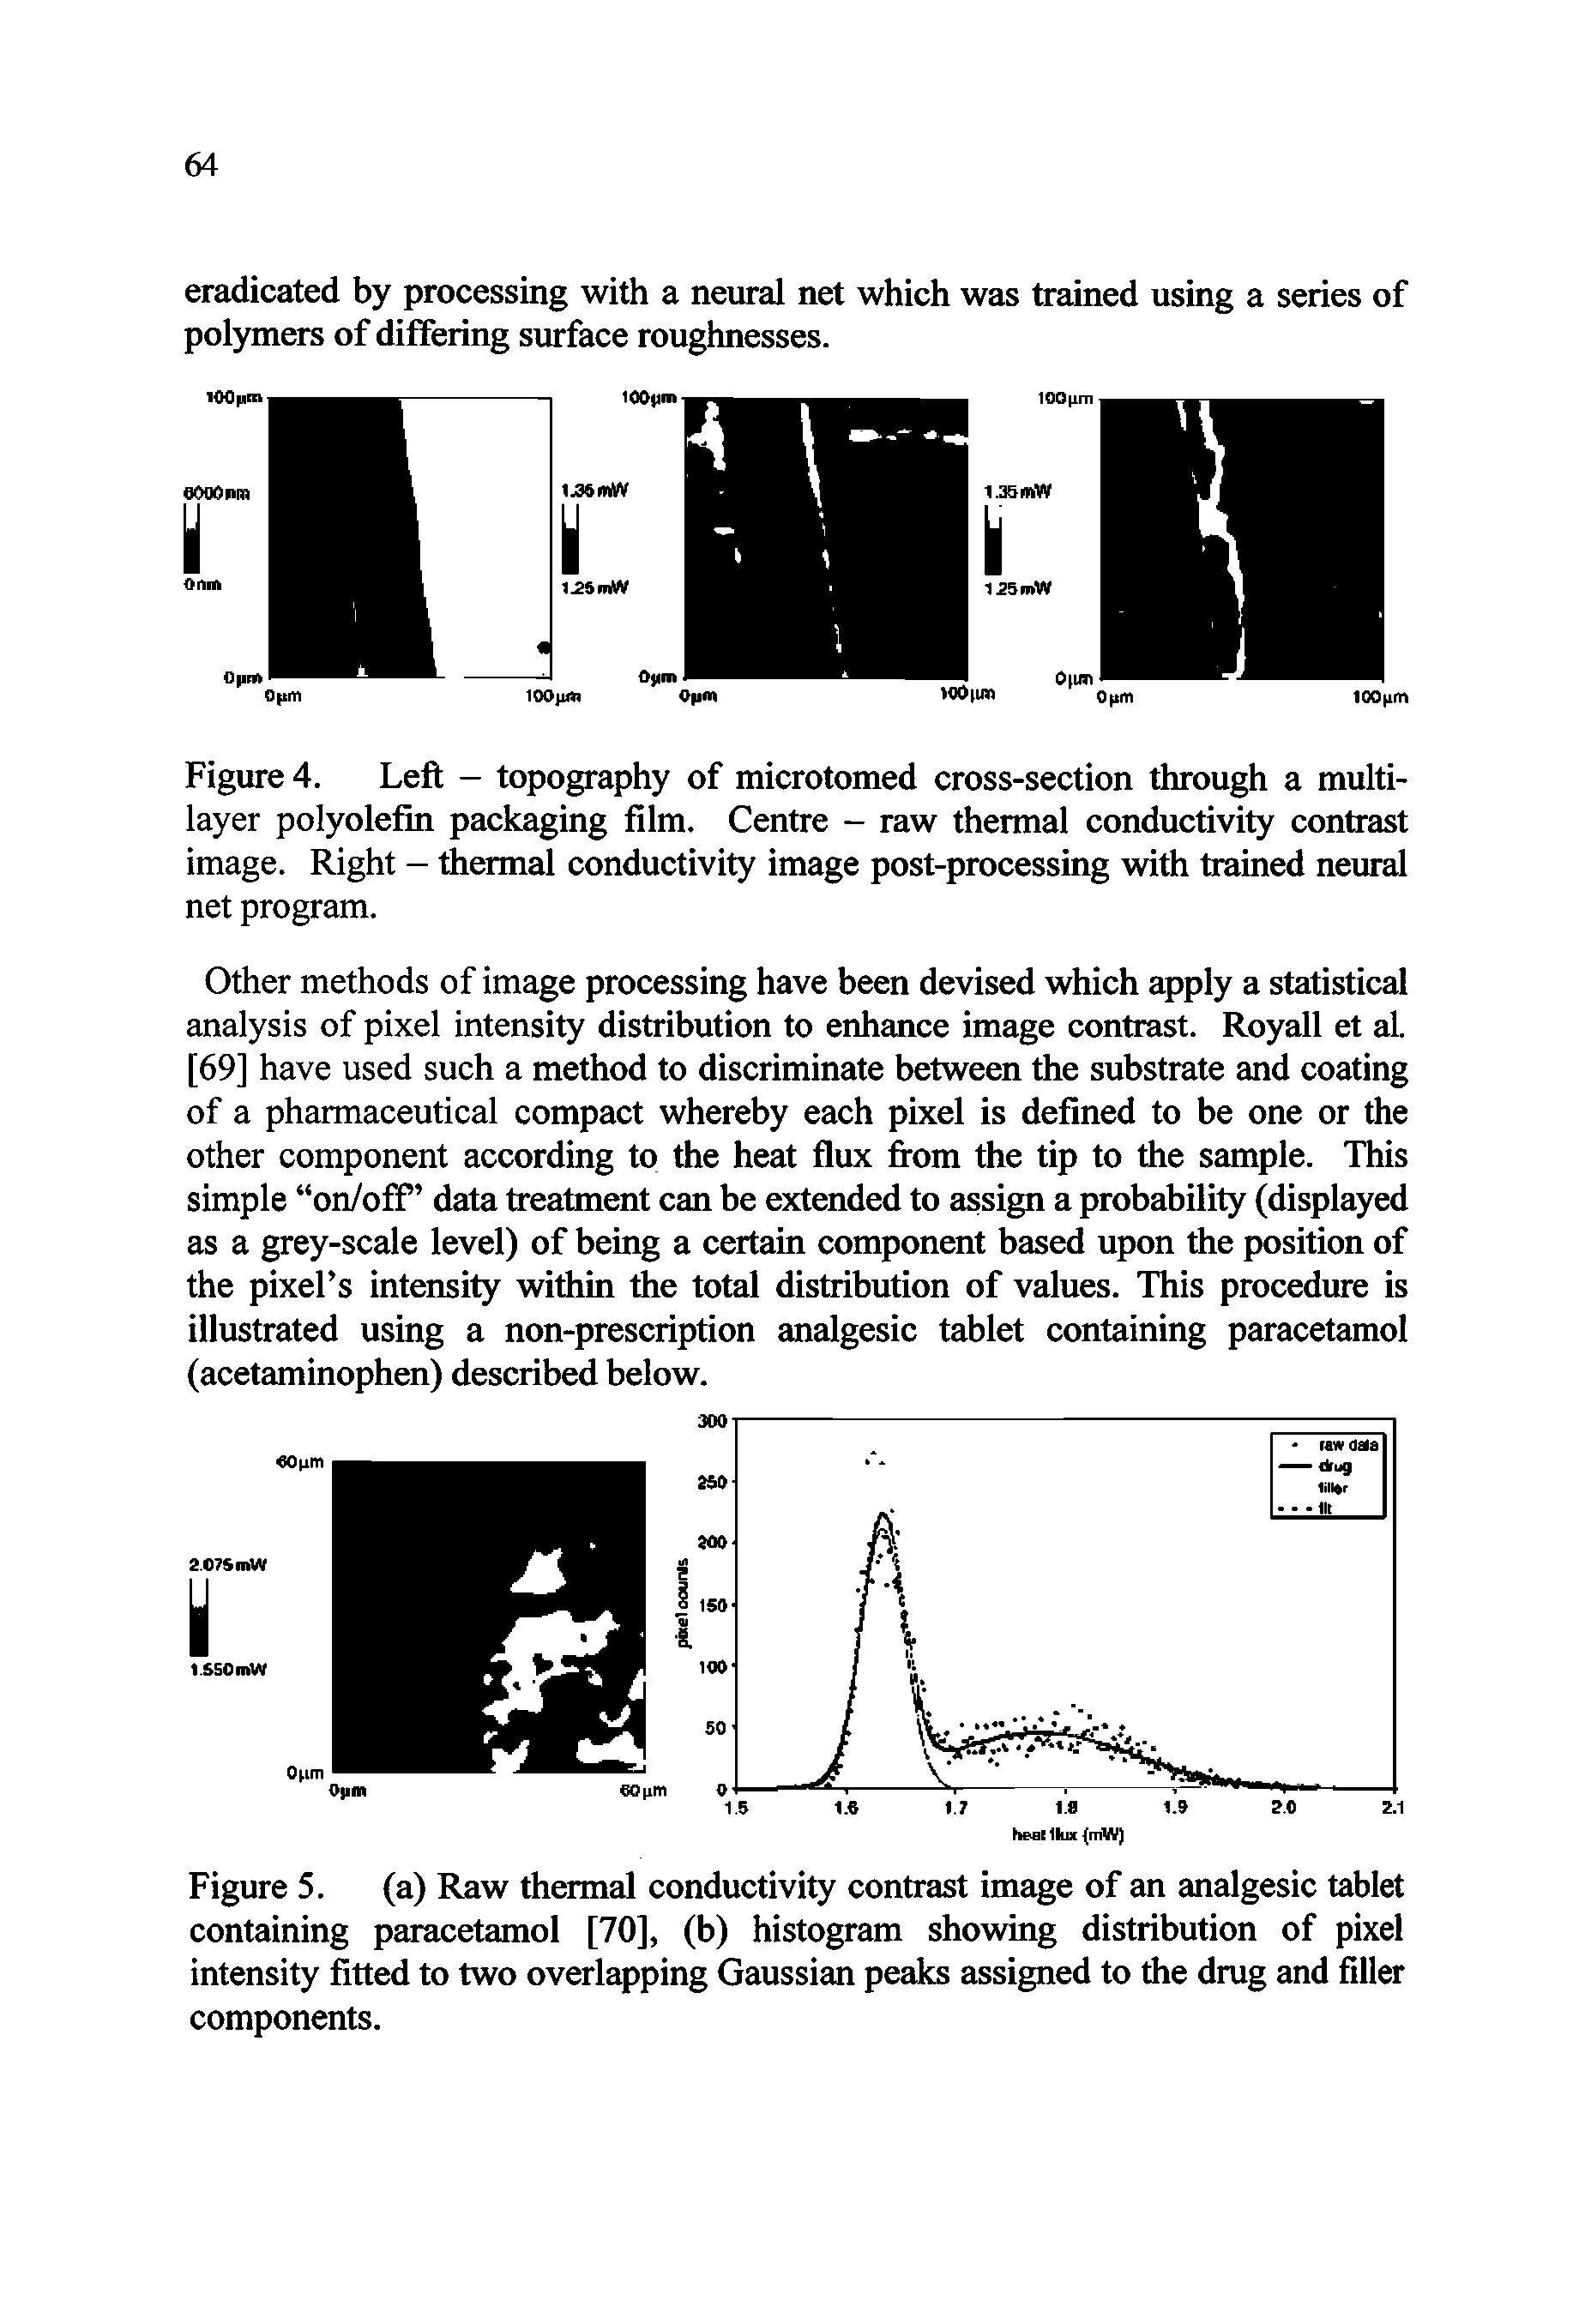 Figure 4. Left - topography of microtomed cross-section through a multilayer polyolefin packaging film. Centre - raw thermal conductivity contrast image. Right - thermal conductivity image postprocessing with trained neural net program.